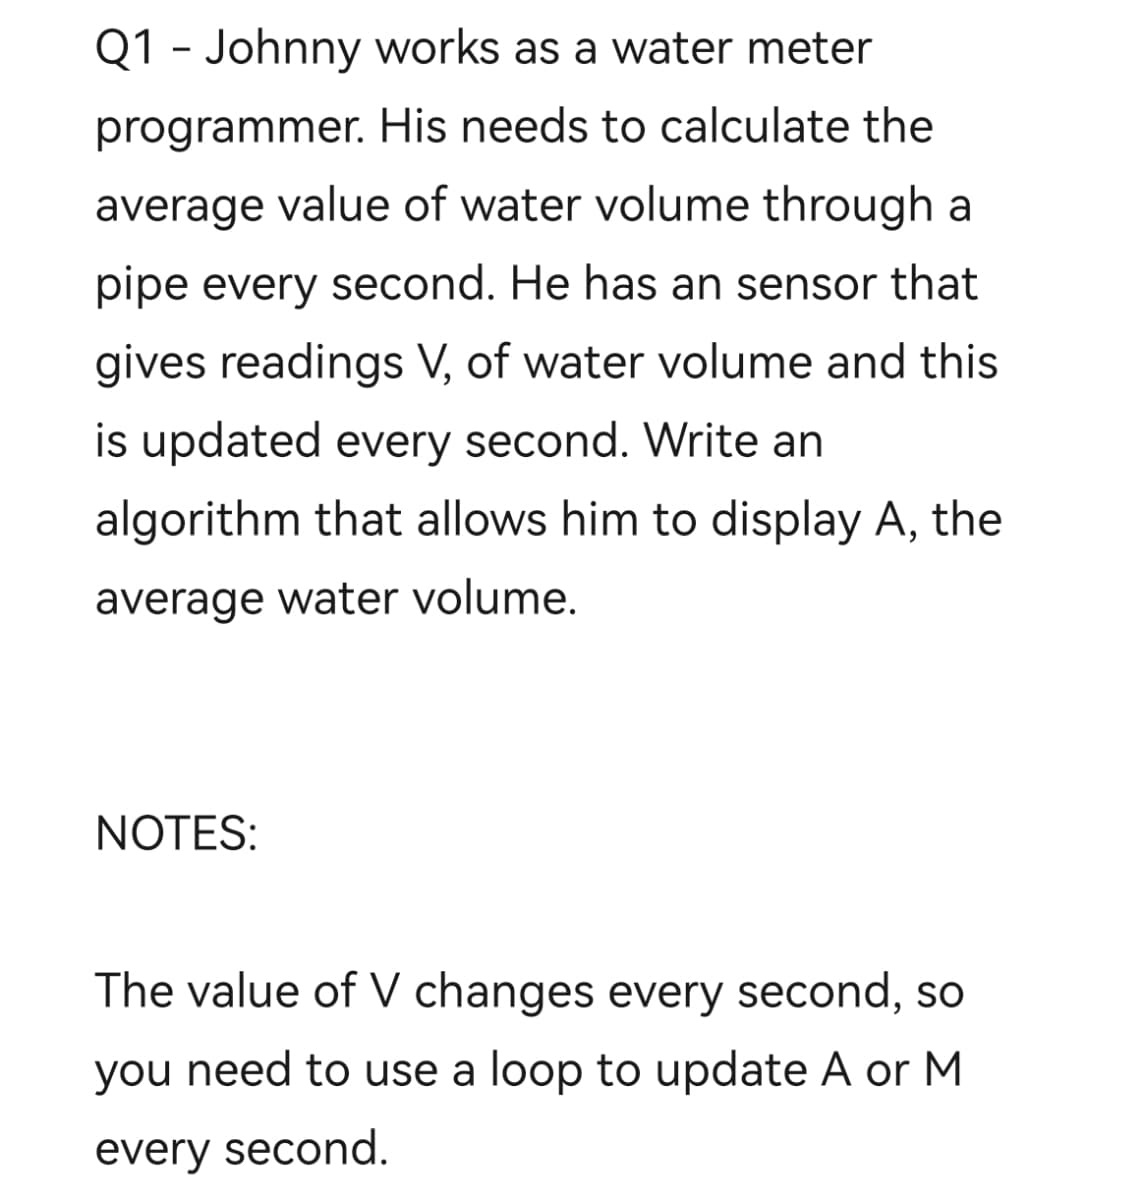 Q1 - Johnny works as a water meter
programmer. His needs to calculate the
average value of water volume through a
pipe every second. He has an sensor that
gives readings V, of water volume and this
is updated every second. Write an
algorithm that allows him to display A, the
average water volume.
NOTES:
The value of V changes every second, so
you need to use a loop to update A or M
every second.